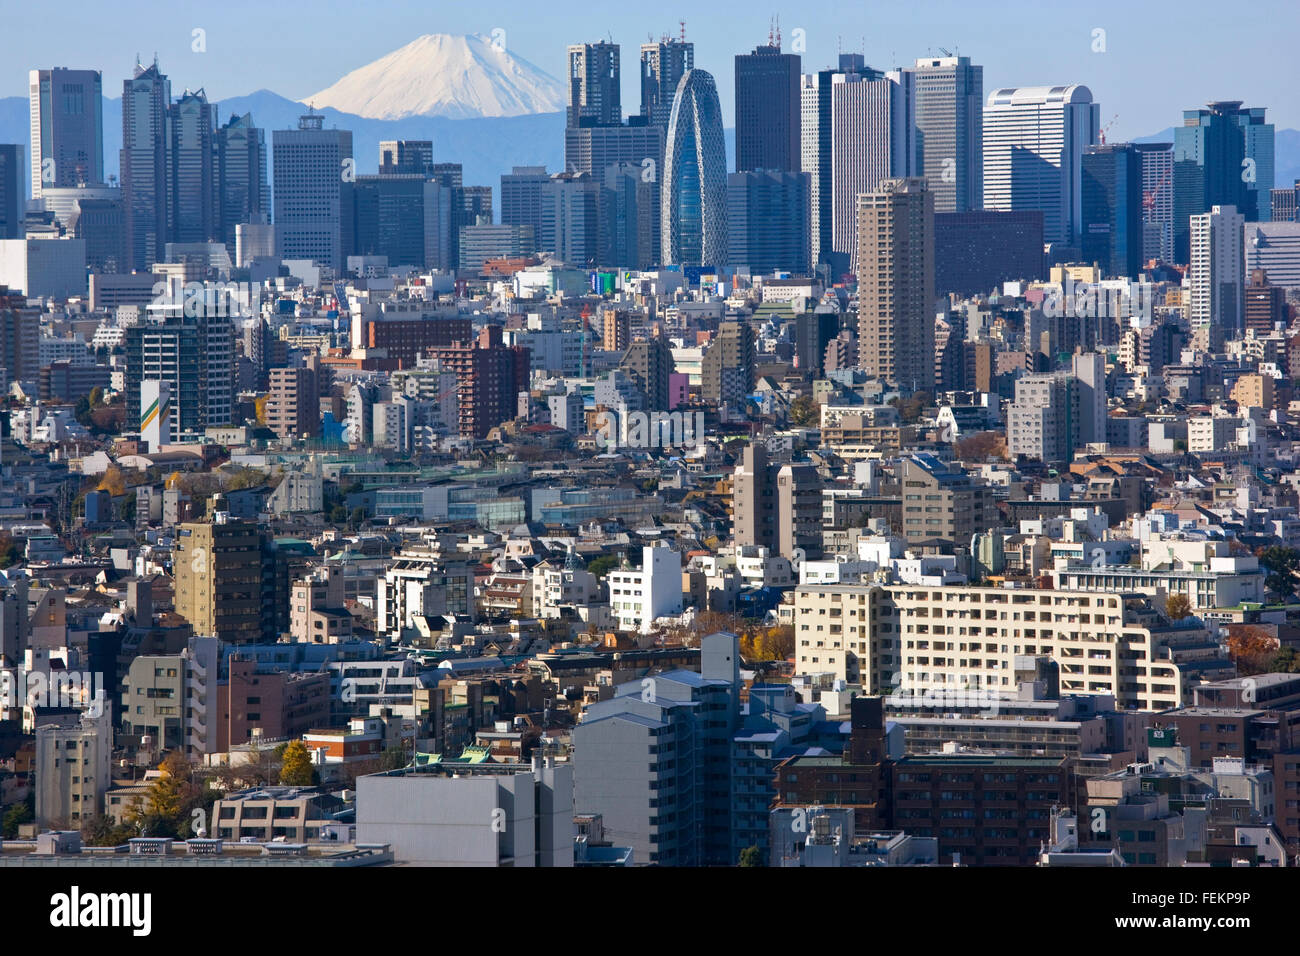 A telephoto view on a clear winter day captures a snow-capped Mt Fuji rising dramatically beyond the skyscrapers (including Stock Photo